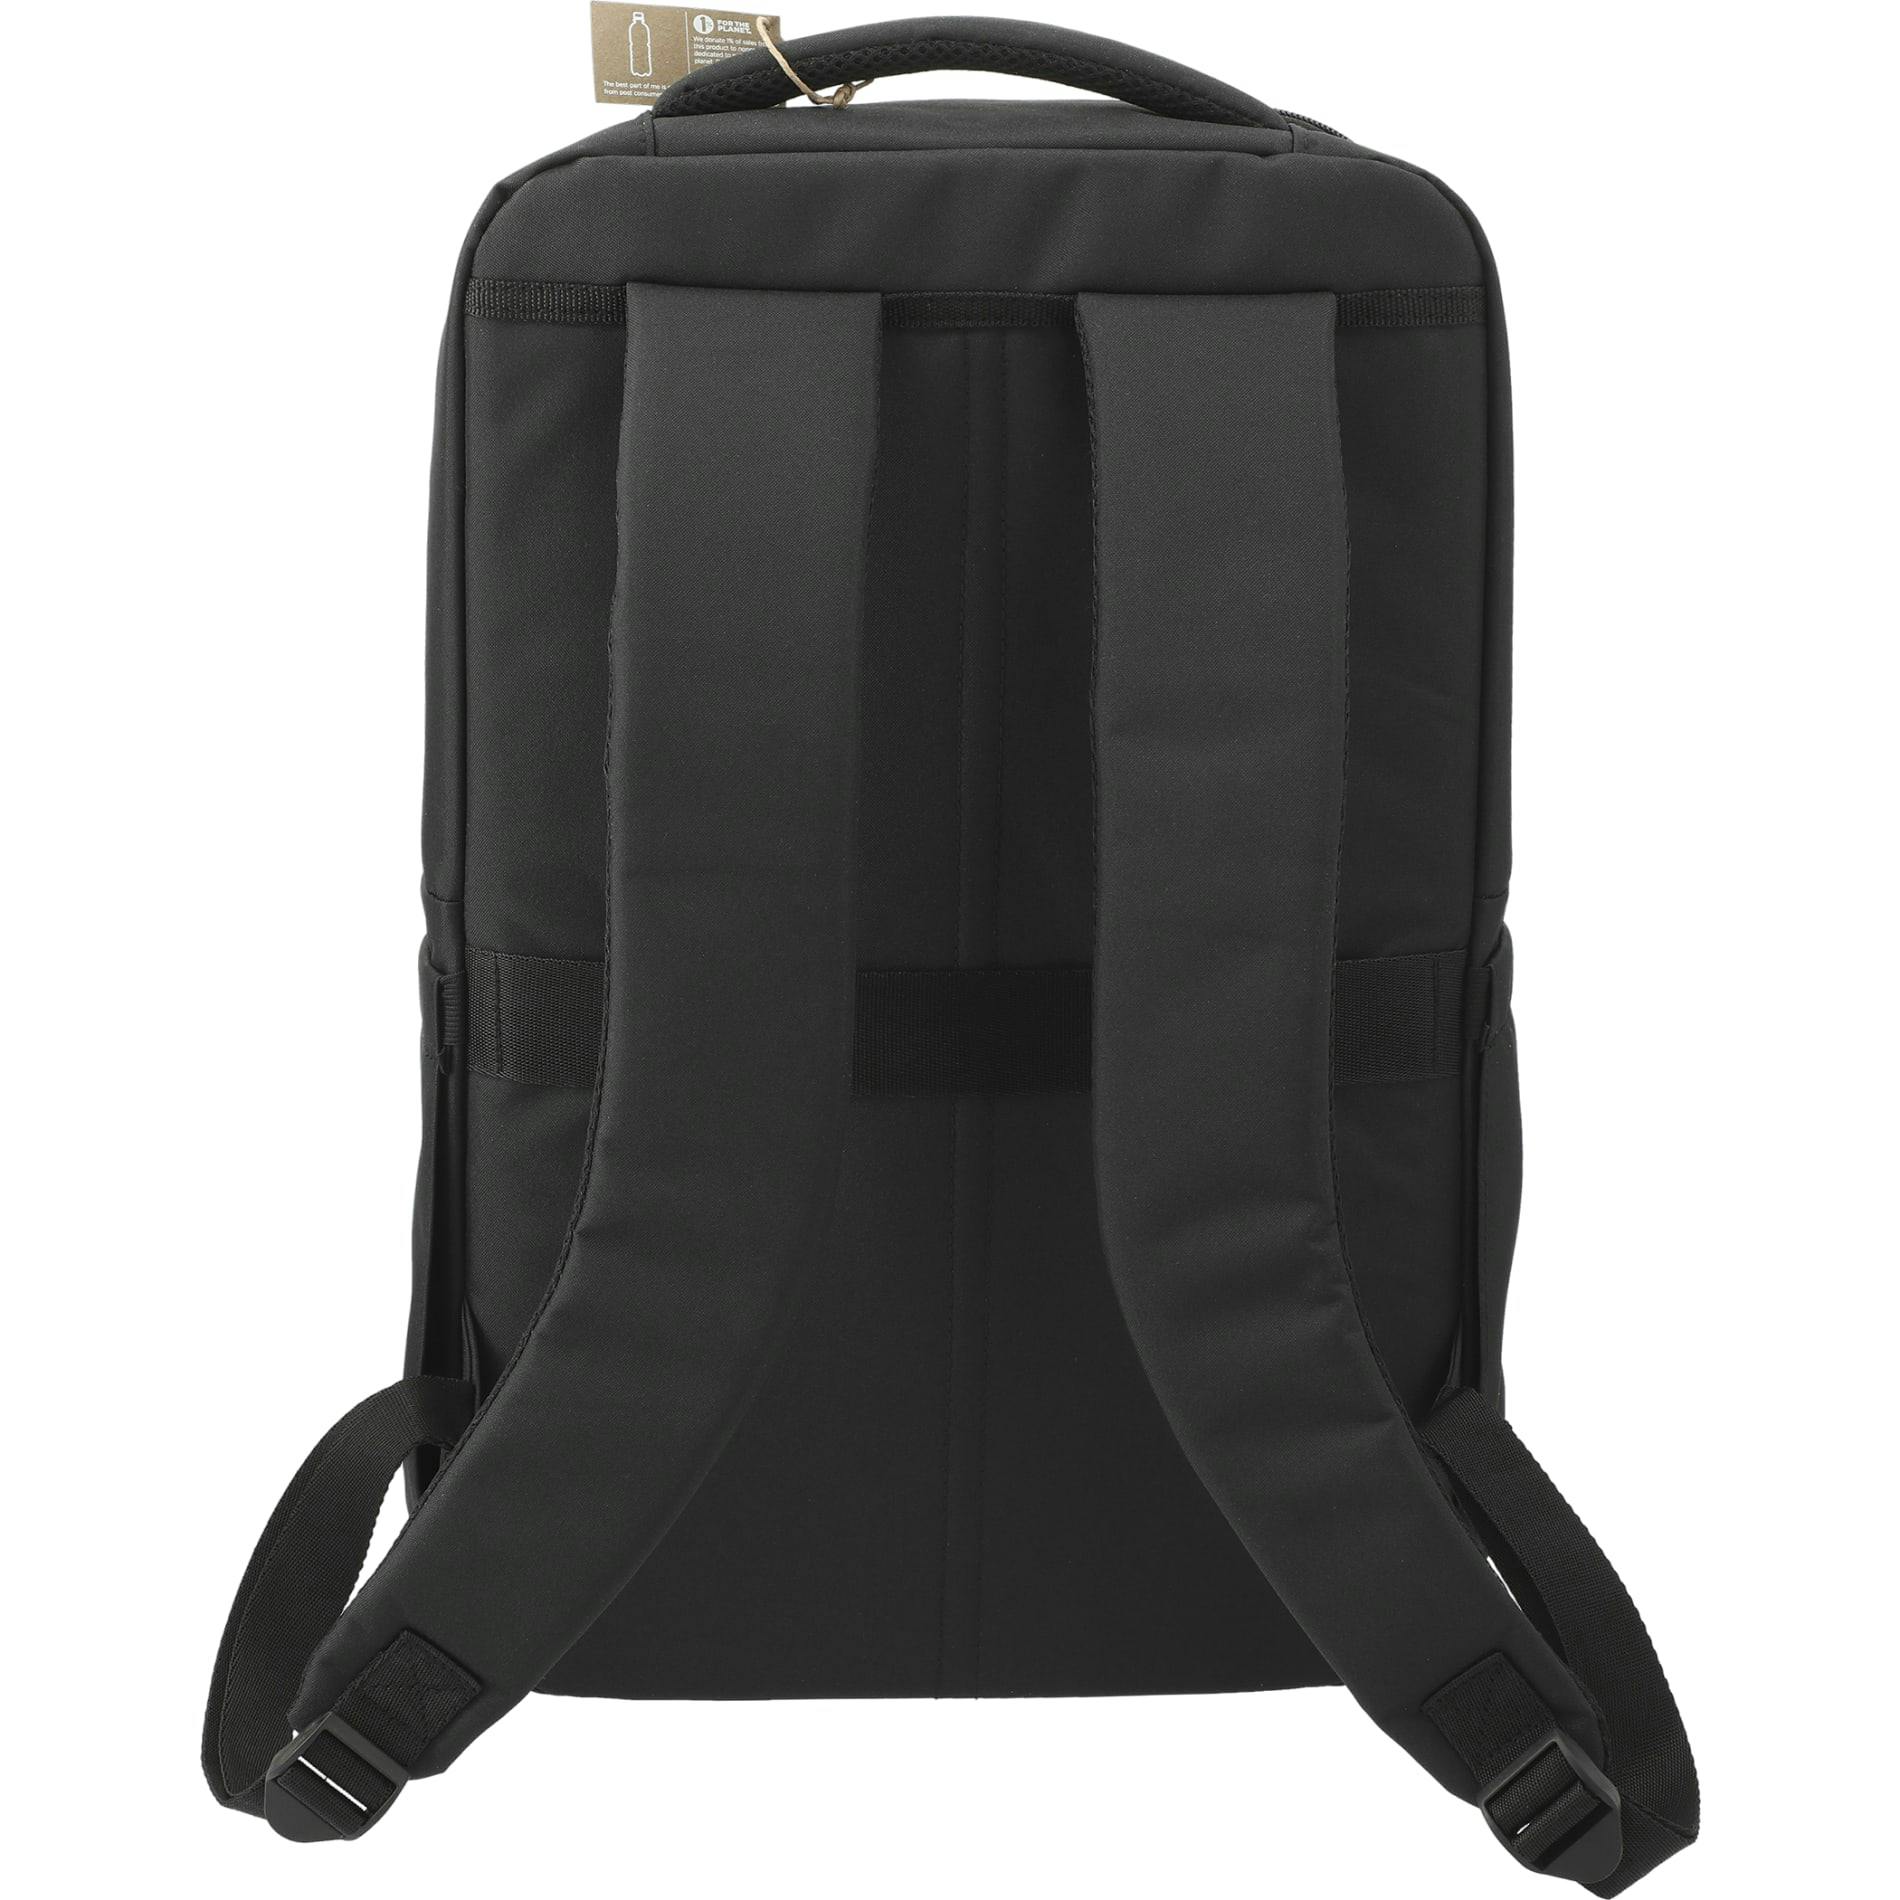 Tranzip Recycled 17" Computer Backpack - additional Image 7